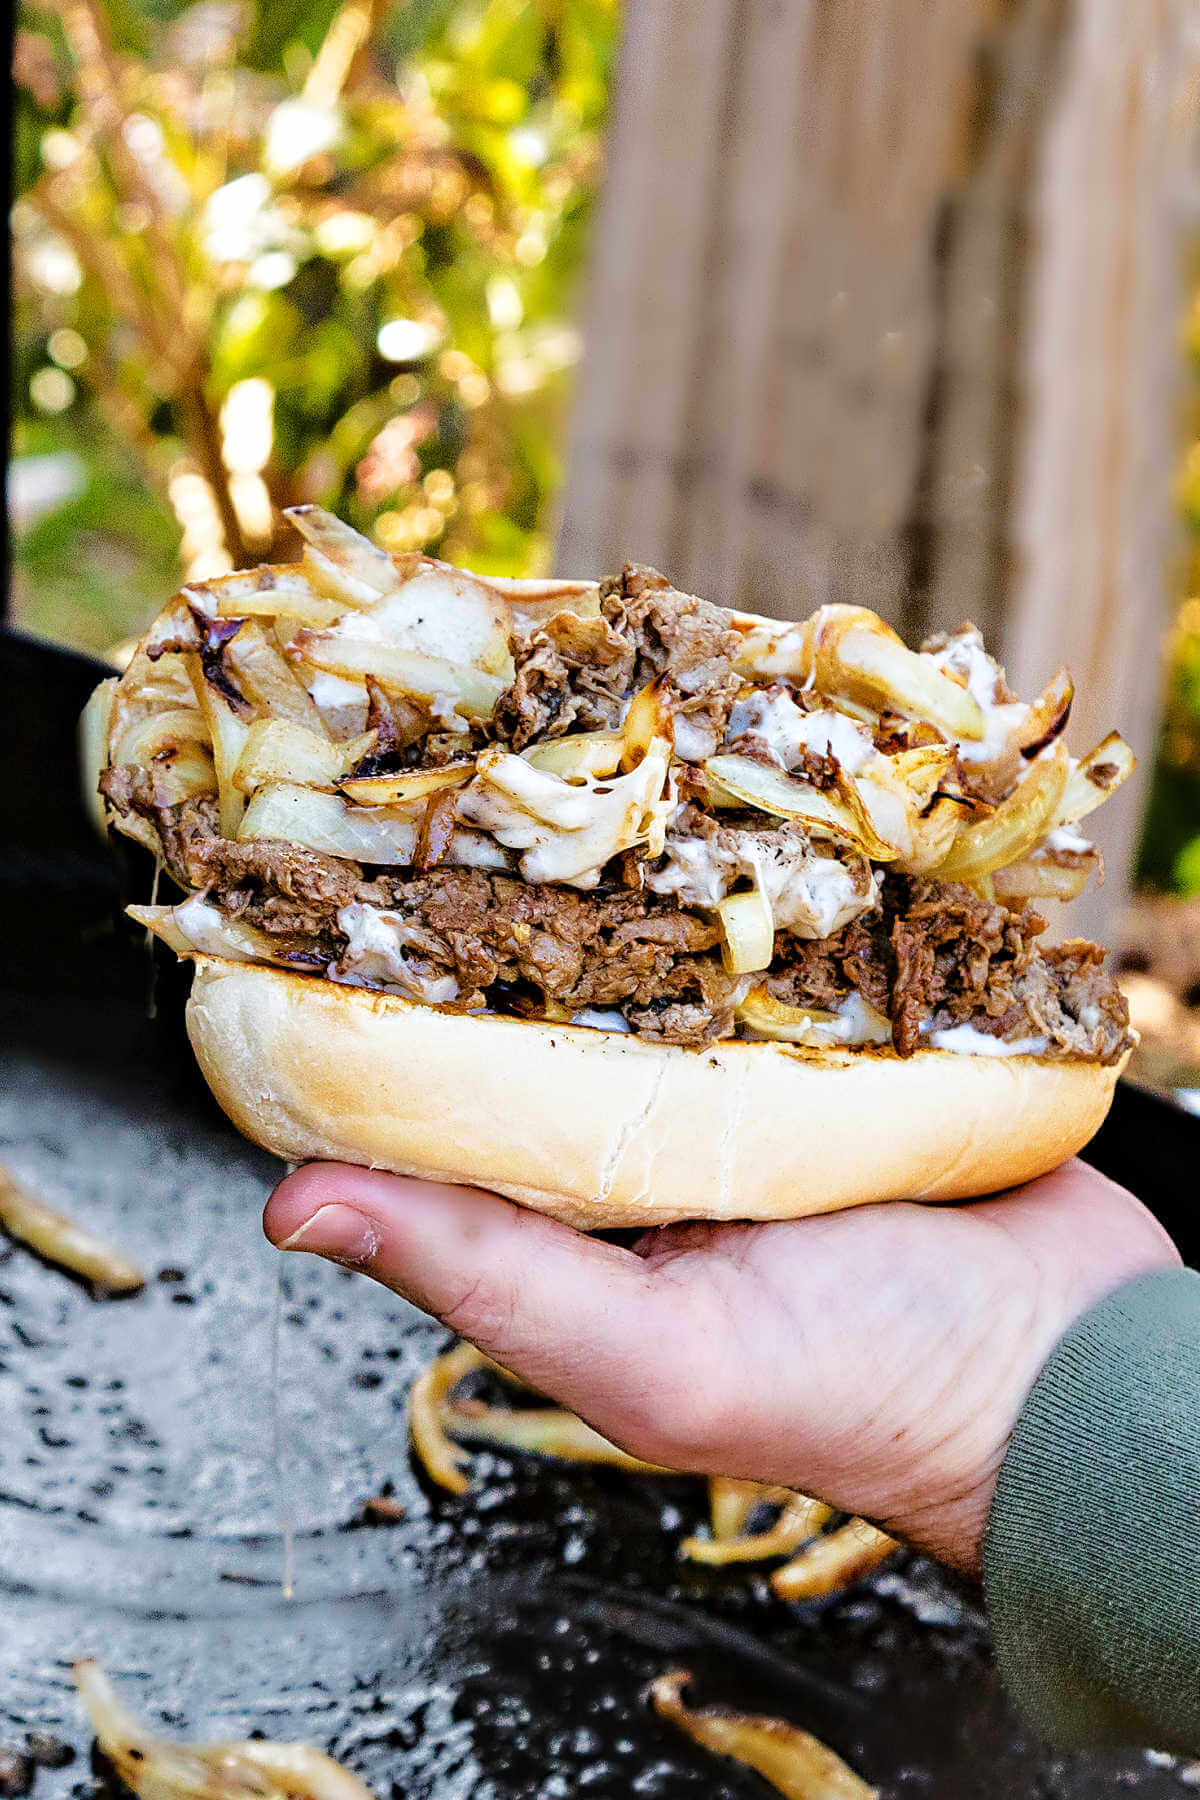 a hand holding a hoagie sandwich bun with philly cheesesteak pile on top in front of a blackstone griddle.